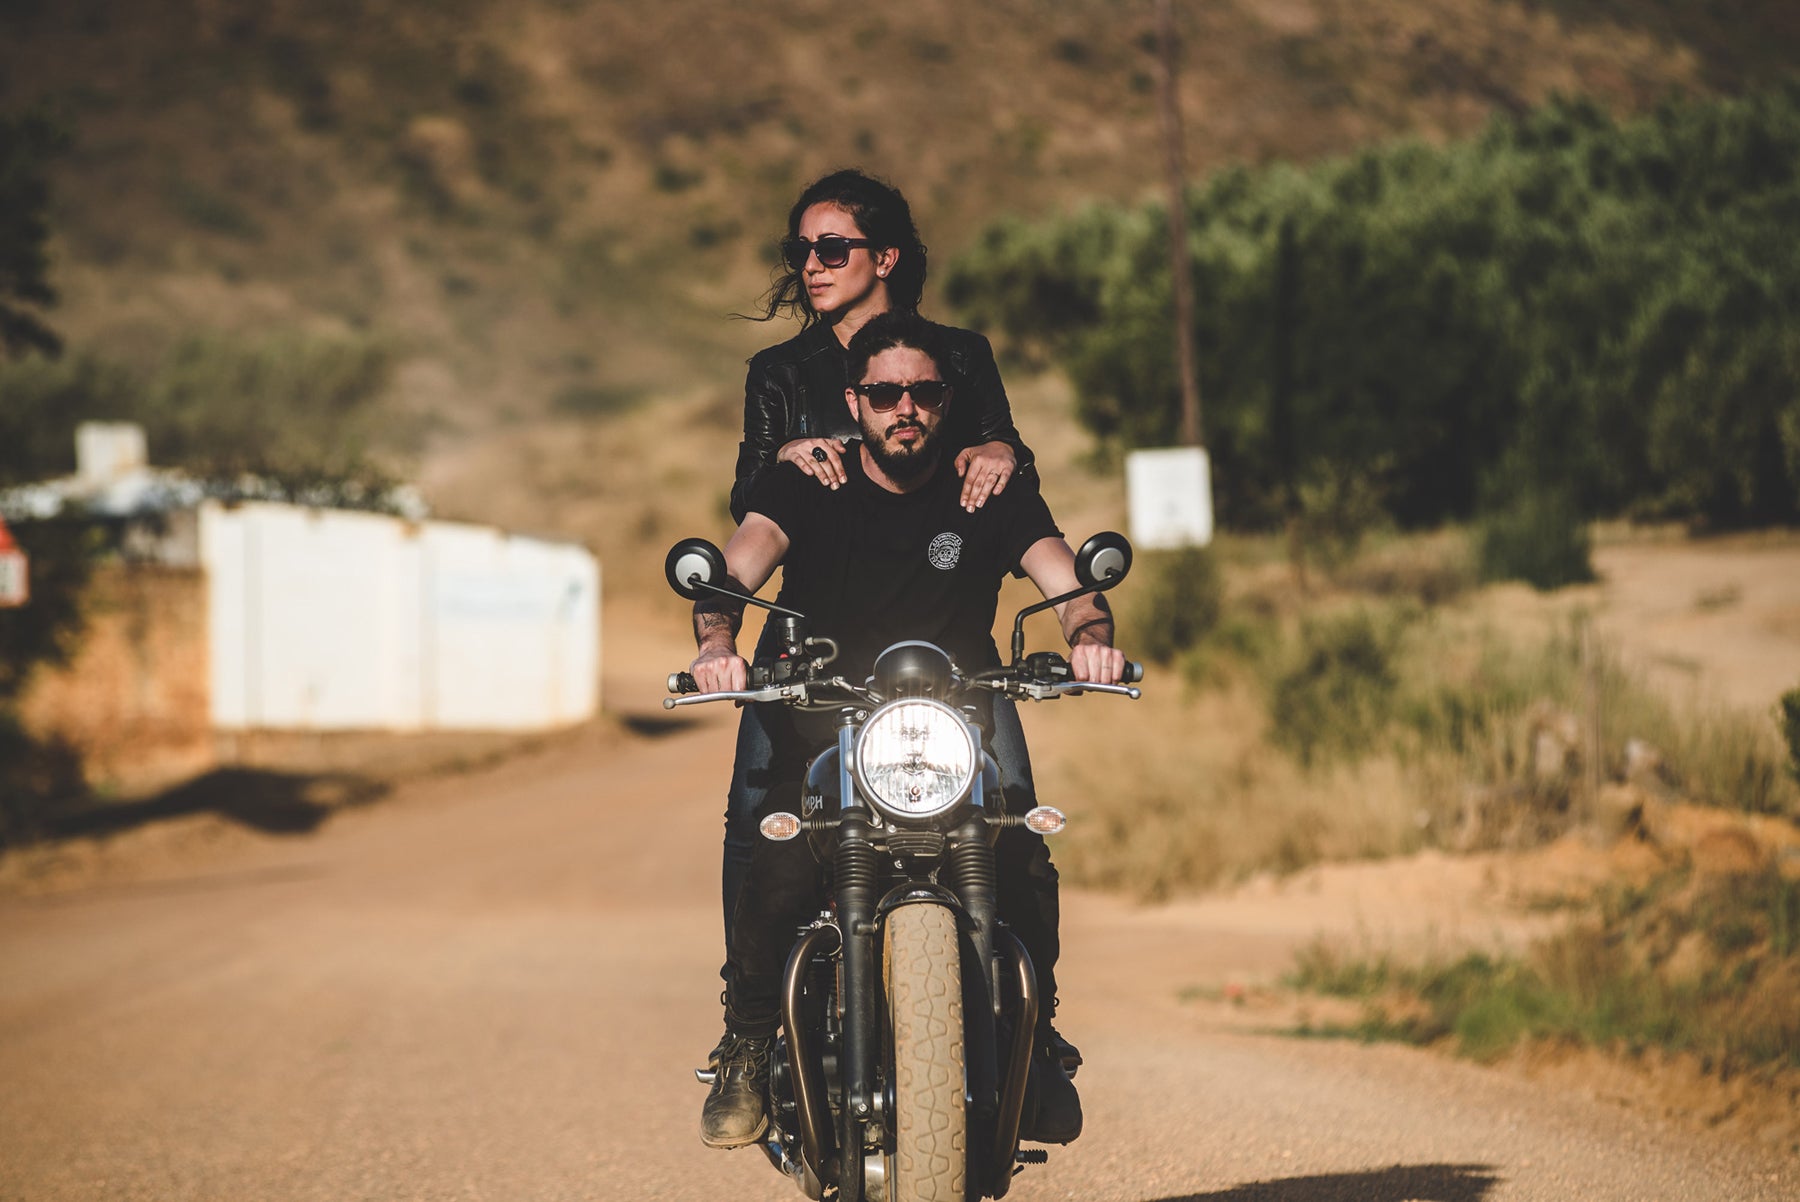 Jeff Campagna and Tania LaCaria, founders of Steeltown Garage Co. riding on a motorcycle in the South African countryside.